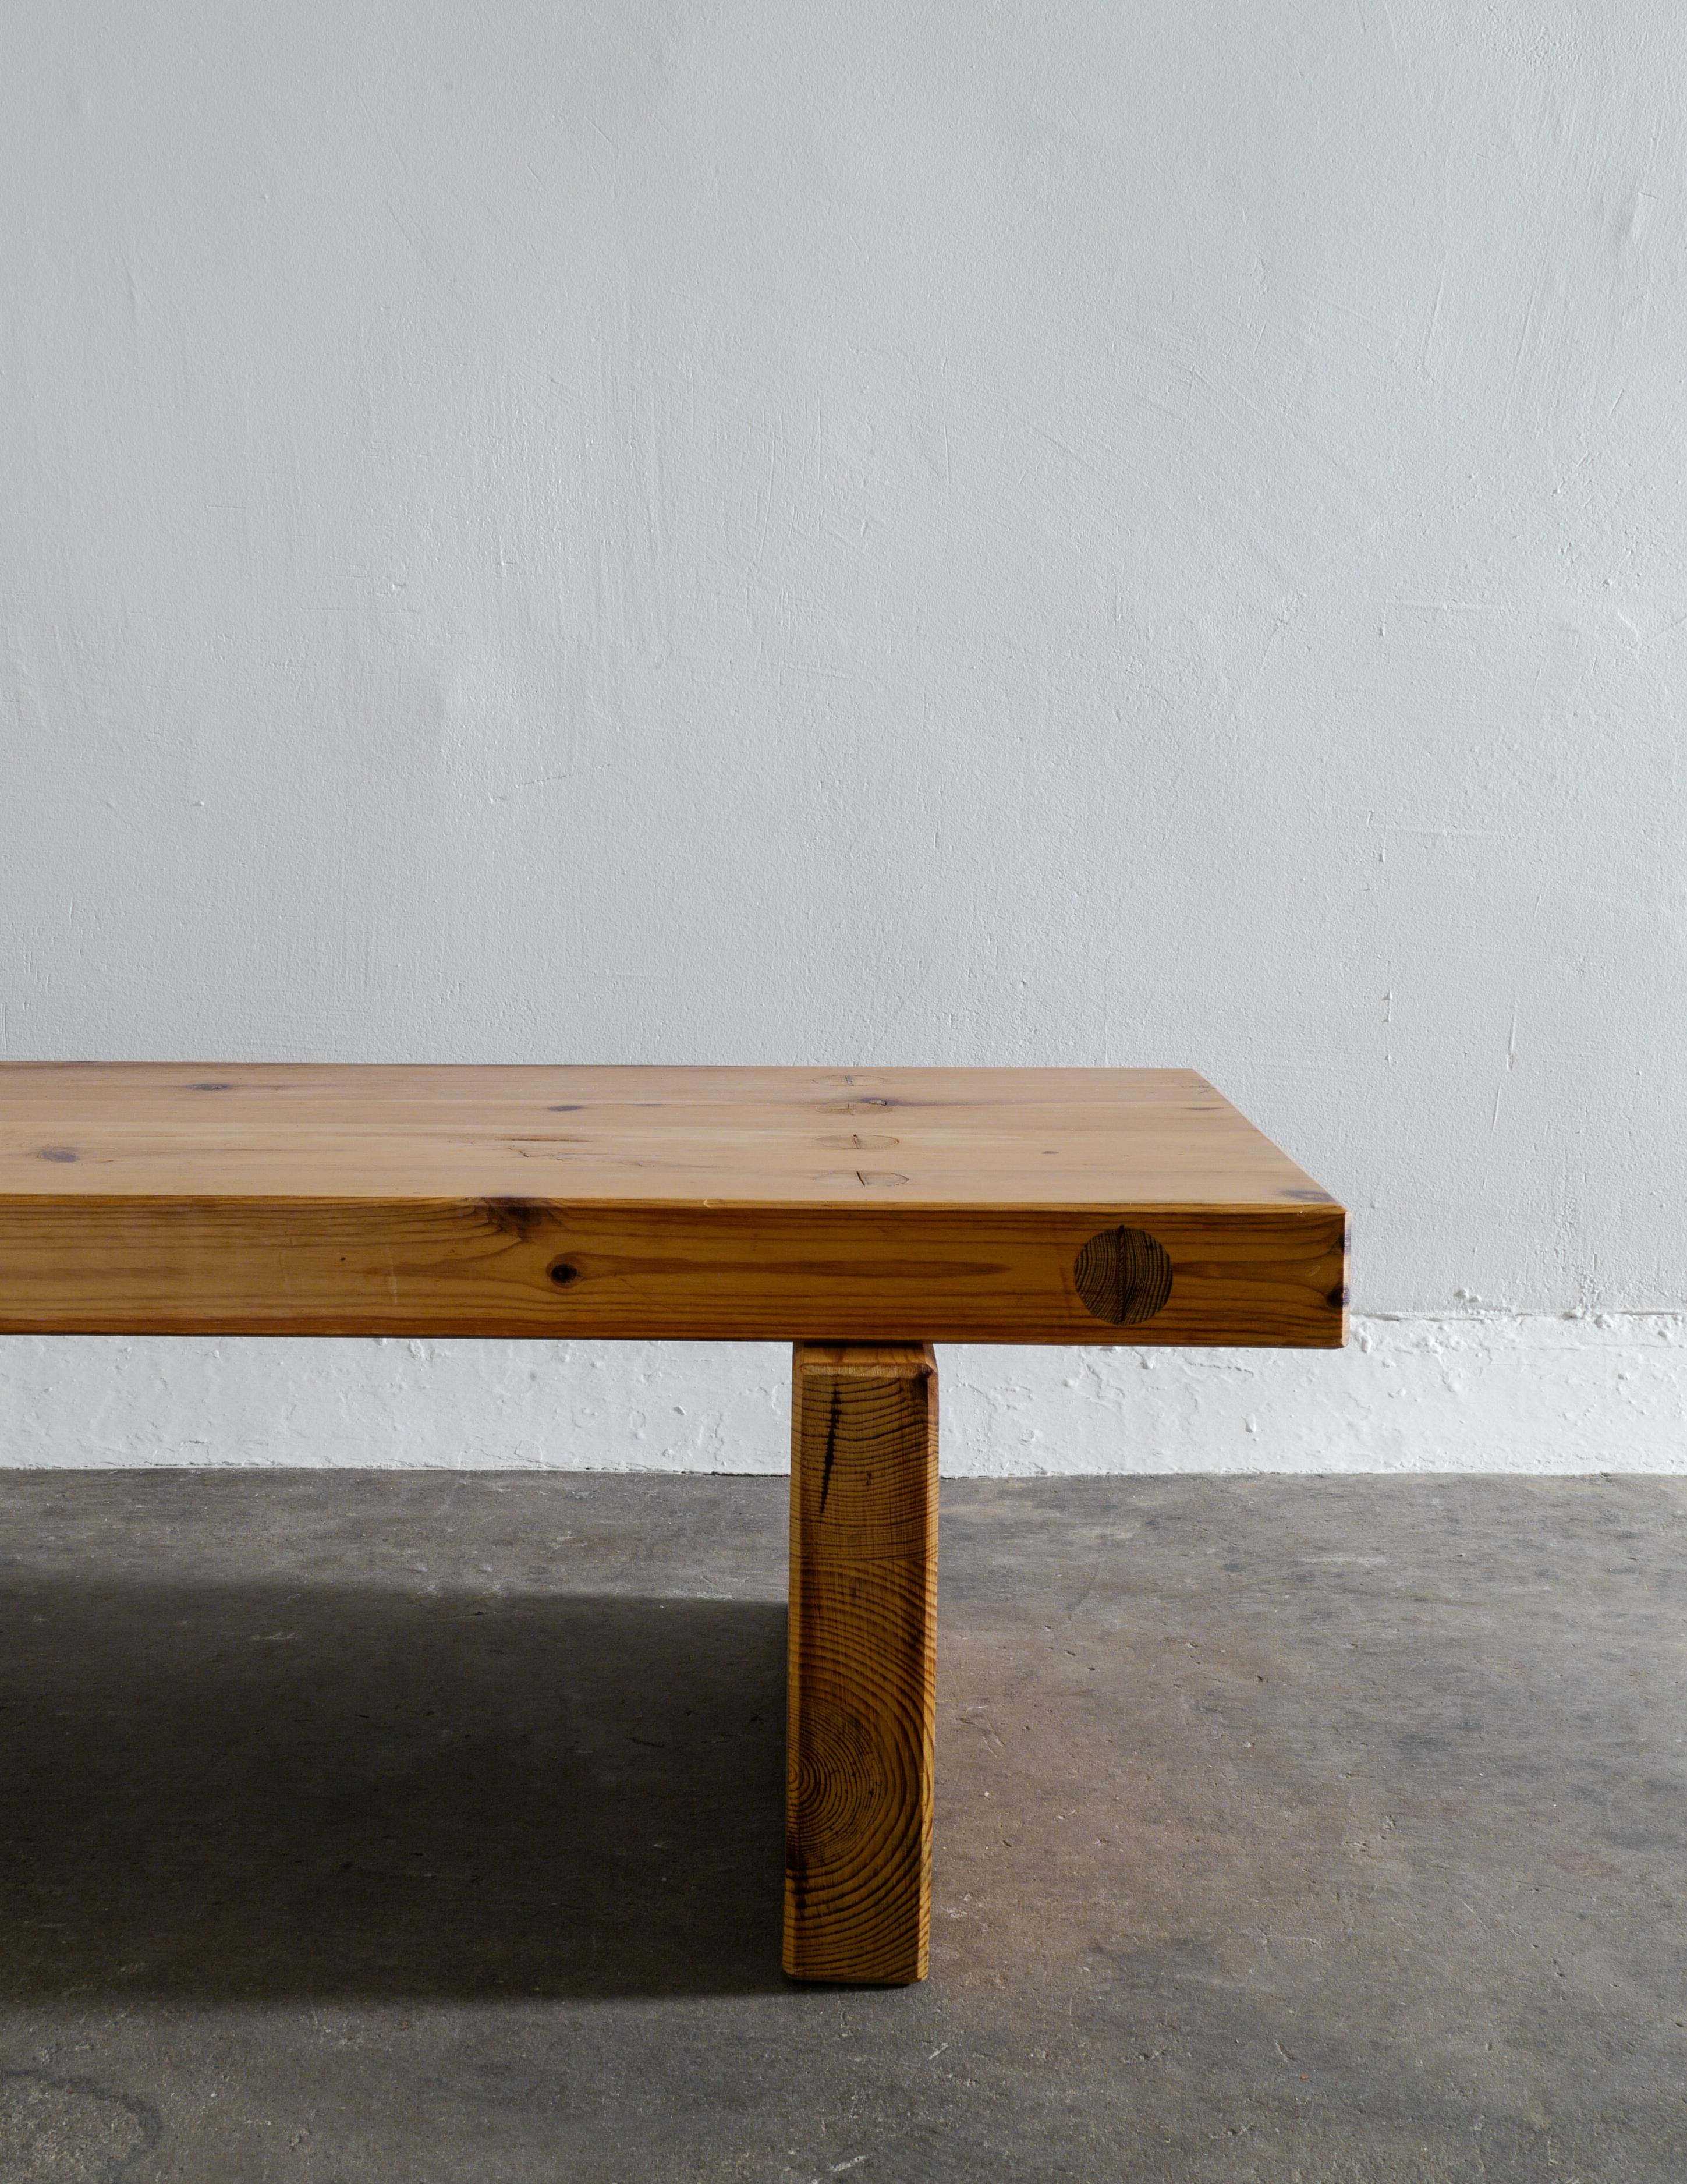 Scandinavian Modern Midcentury Pine Bench Table by Roland Wilhelmsson Produced in Sweden, 1970s